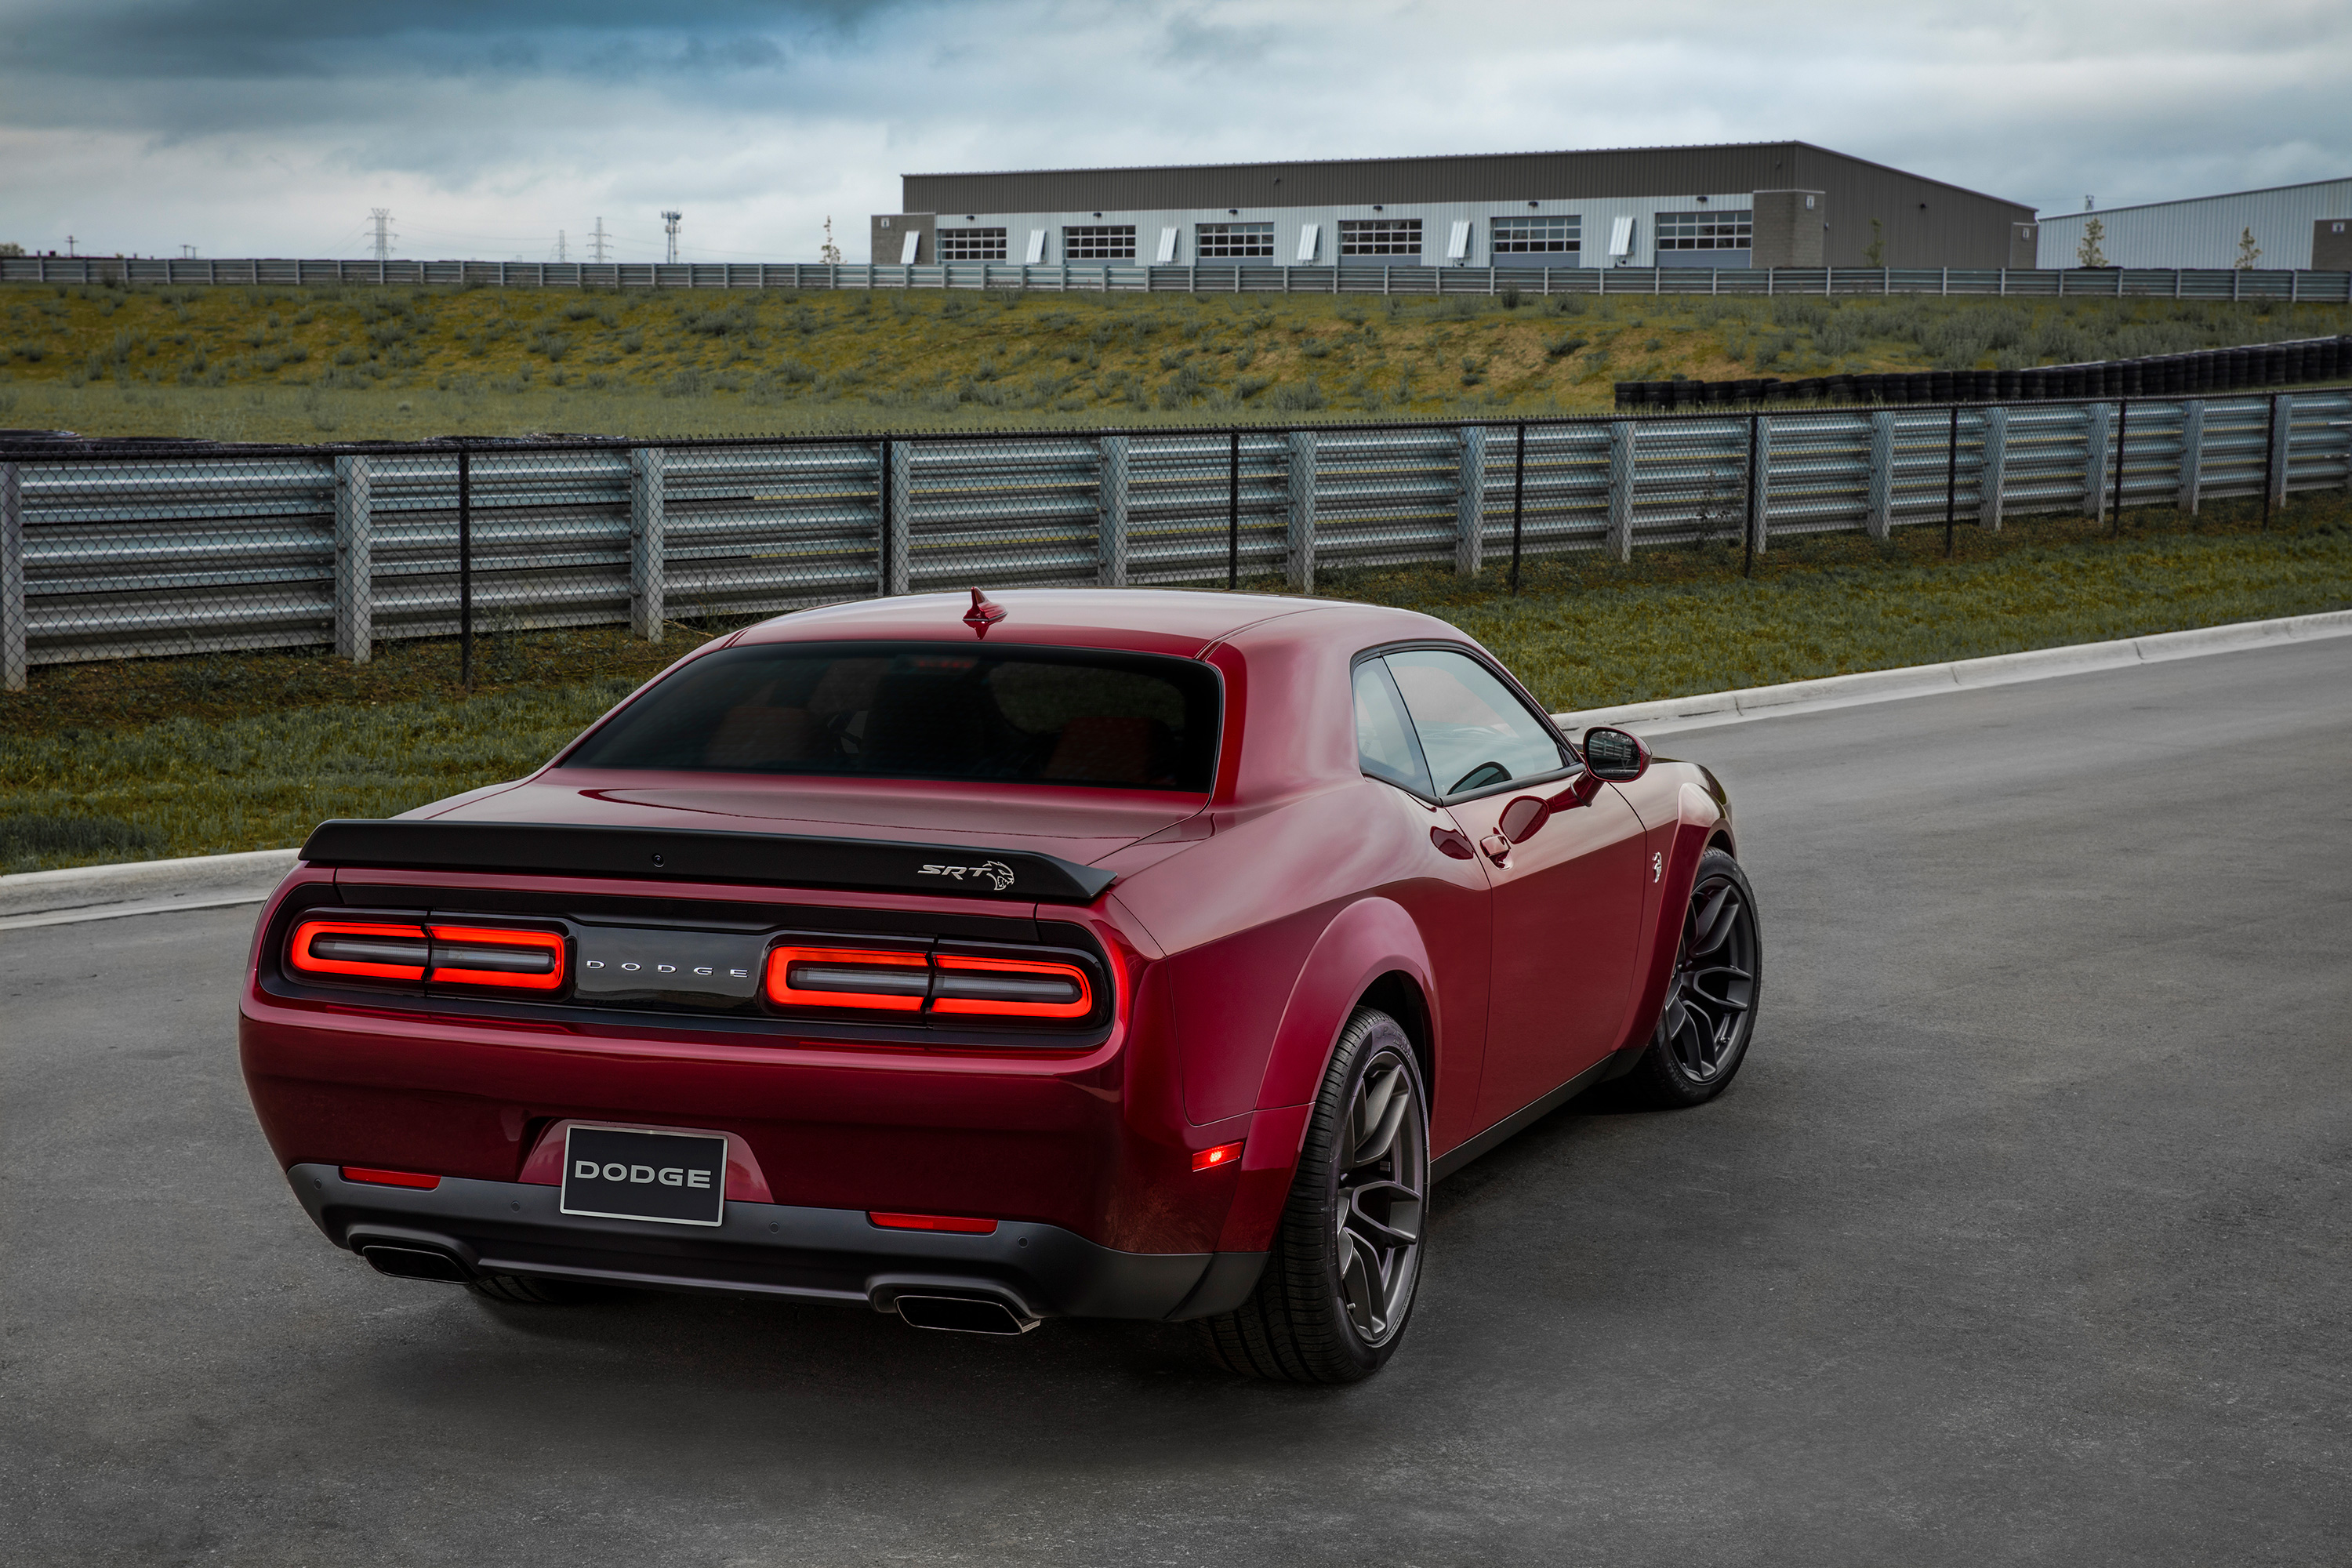 Dodge Challenger Srt Hellcat Widebody in red photographed from behind